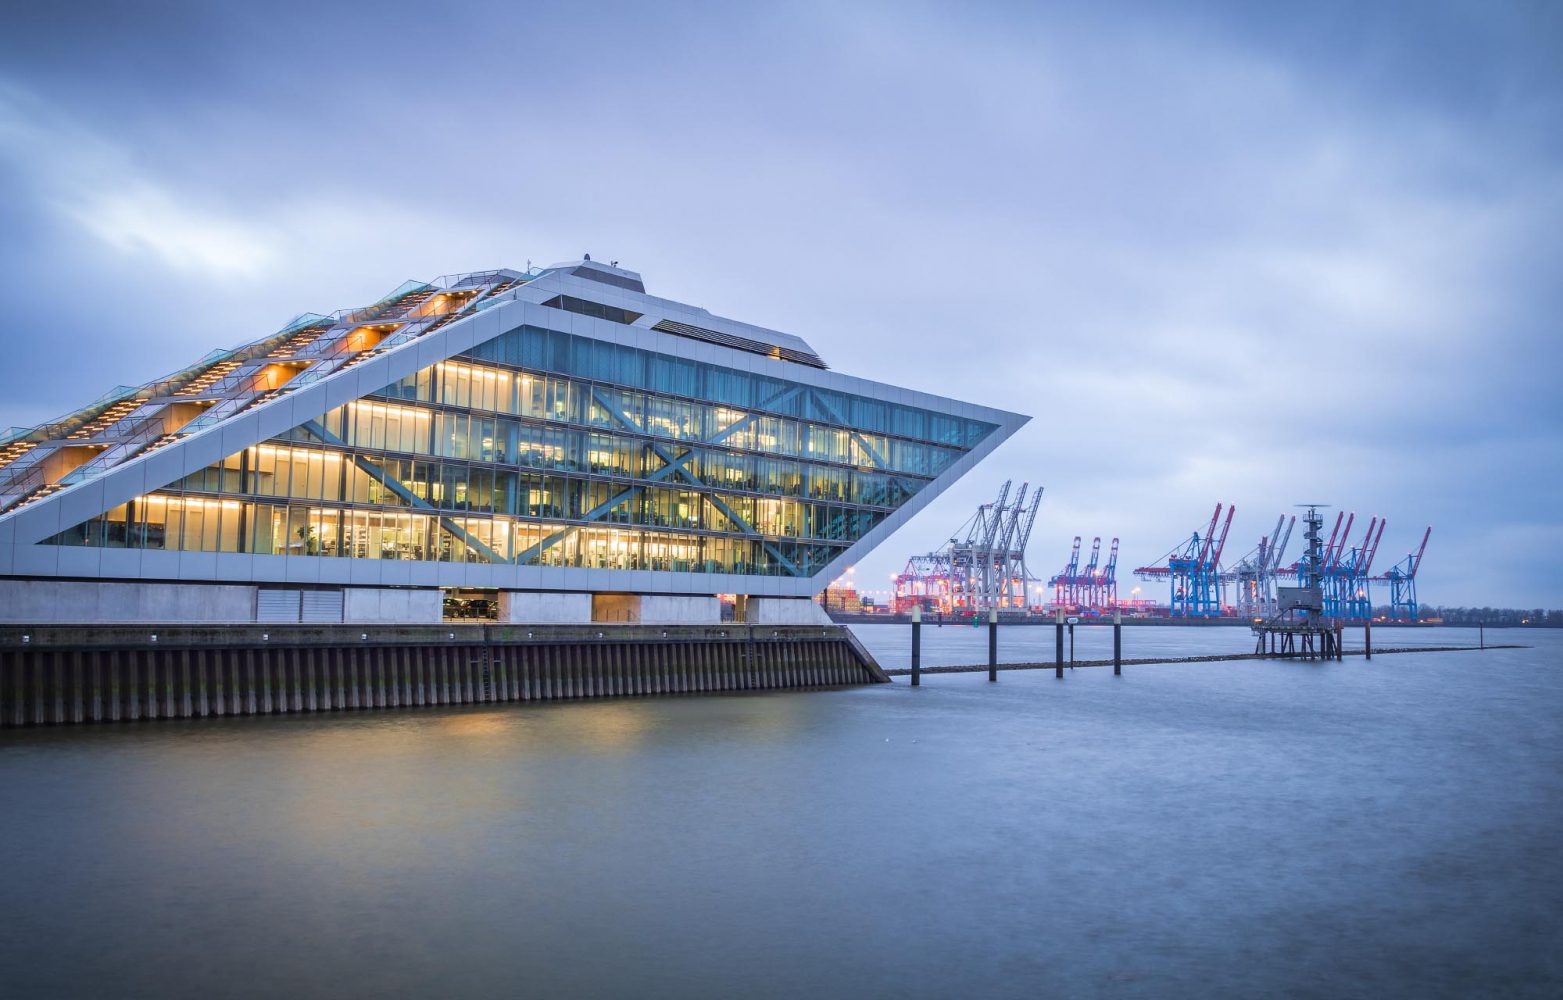 Dockland office building in Hamburg, Germany, on a dramatically cloudy winter morning